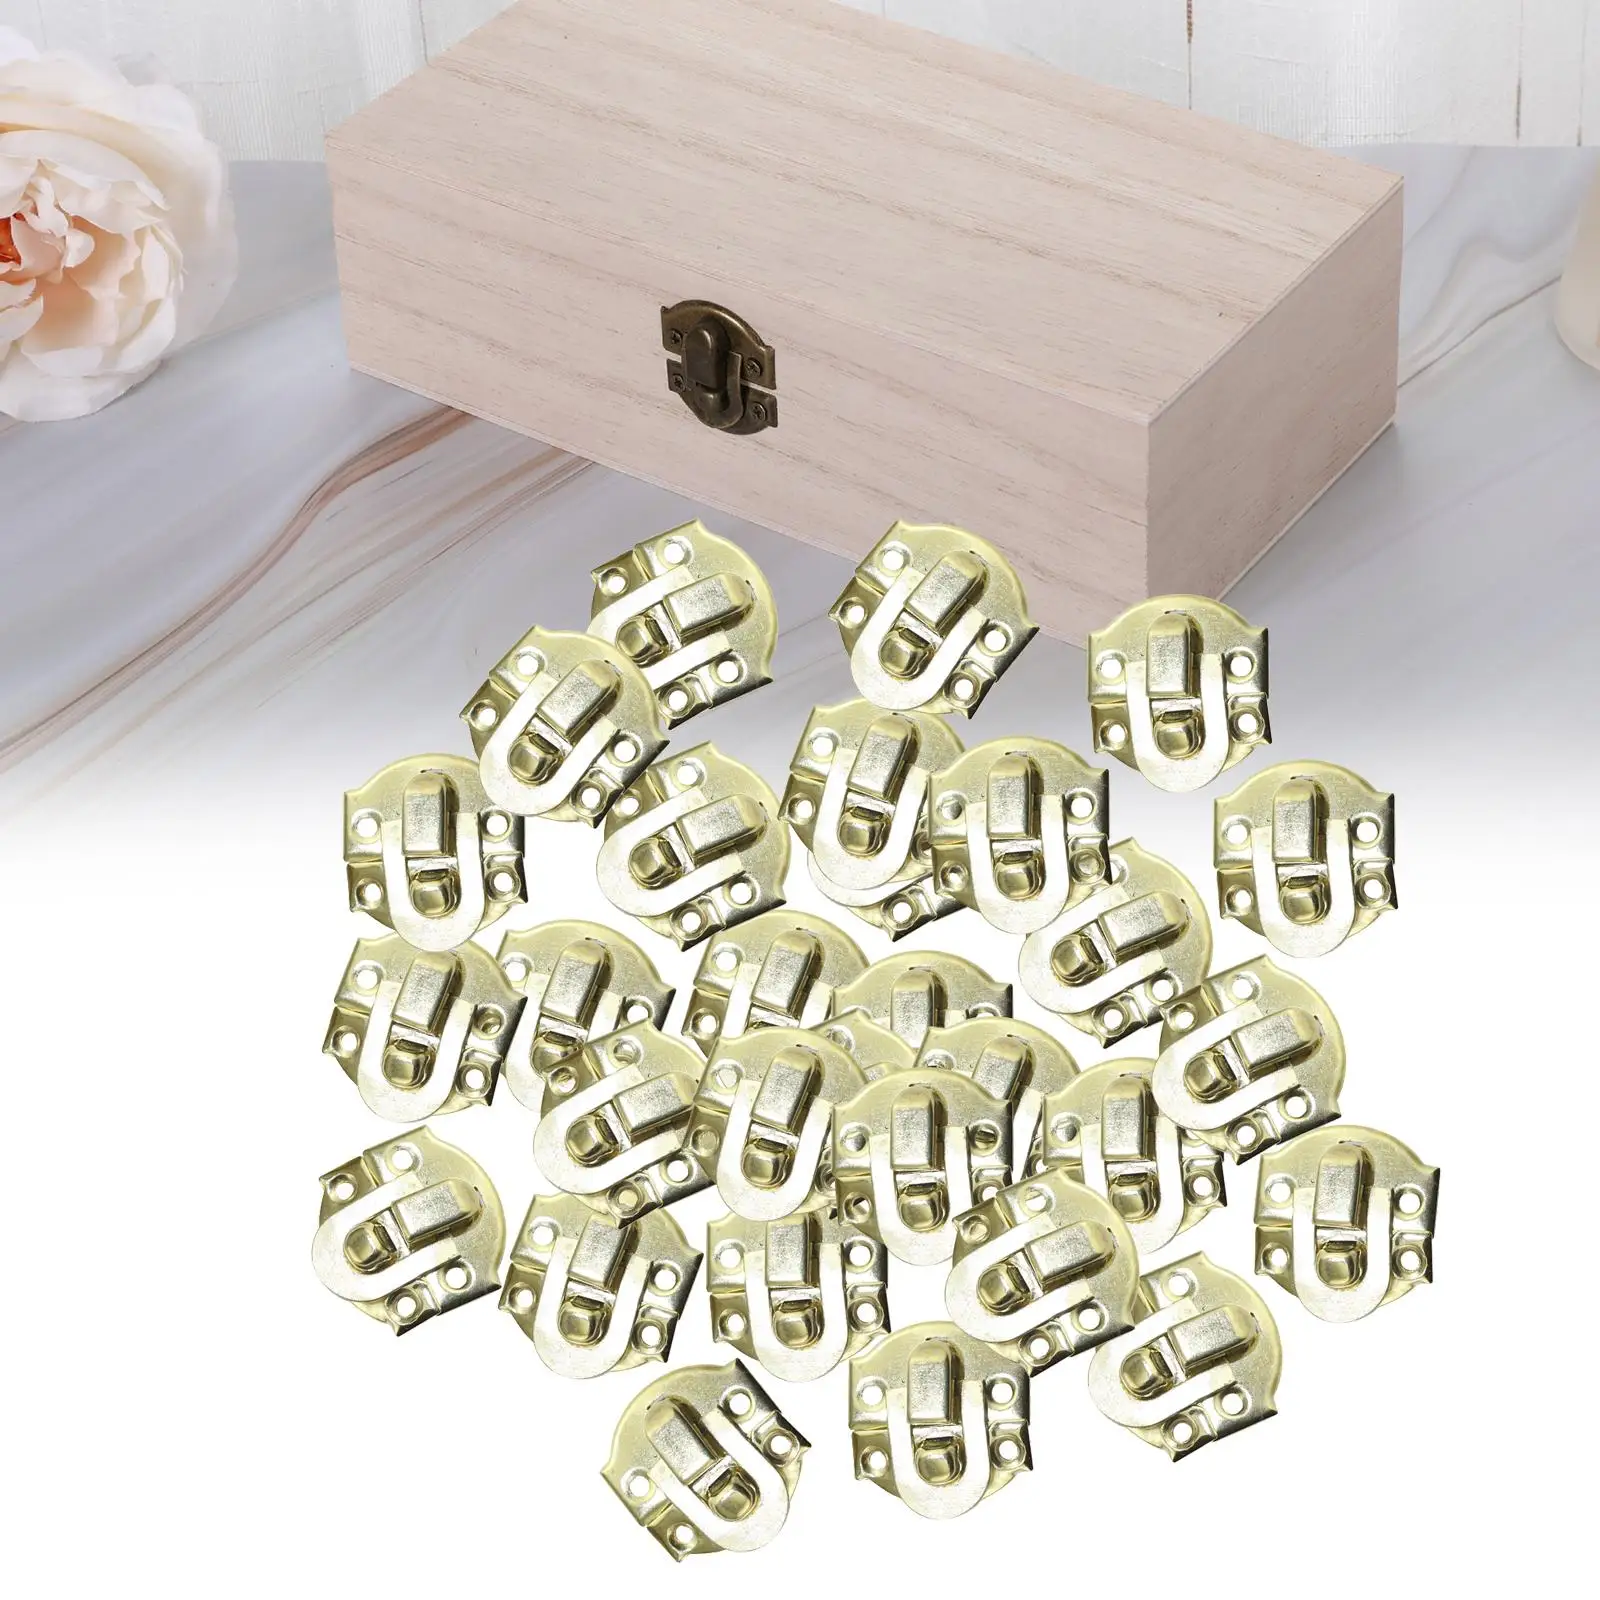 50x Smooth Box Catch latches Hasp Locks Padlock Retro Style Decoration Buckles for Jewelry Boxes Cabinet Furniture Drawer